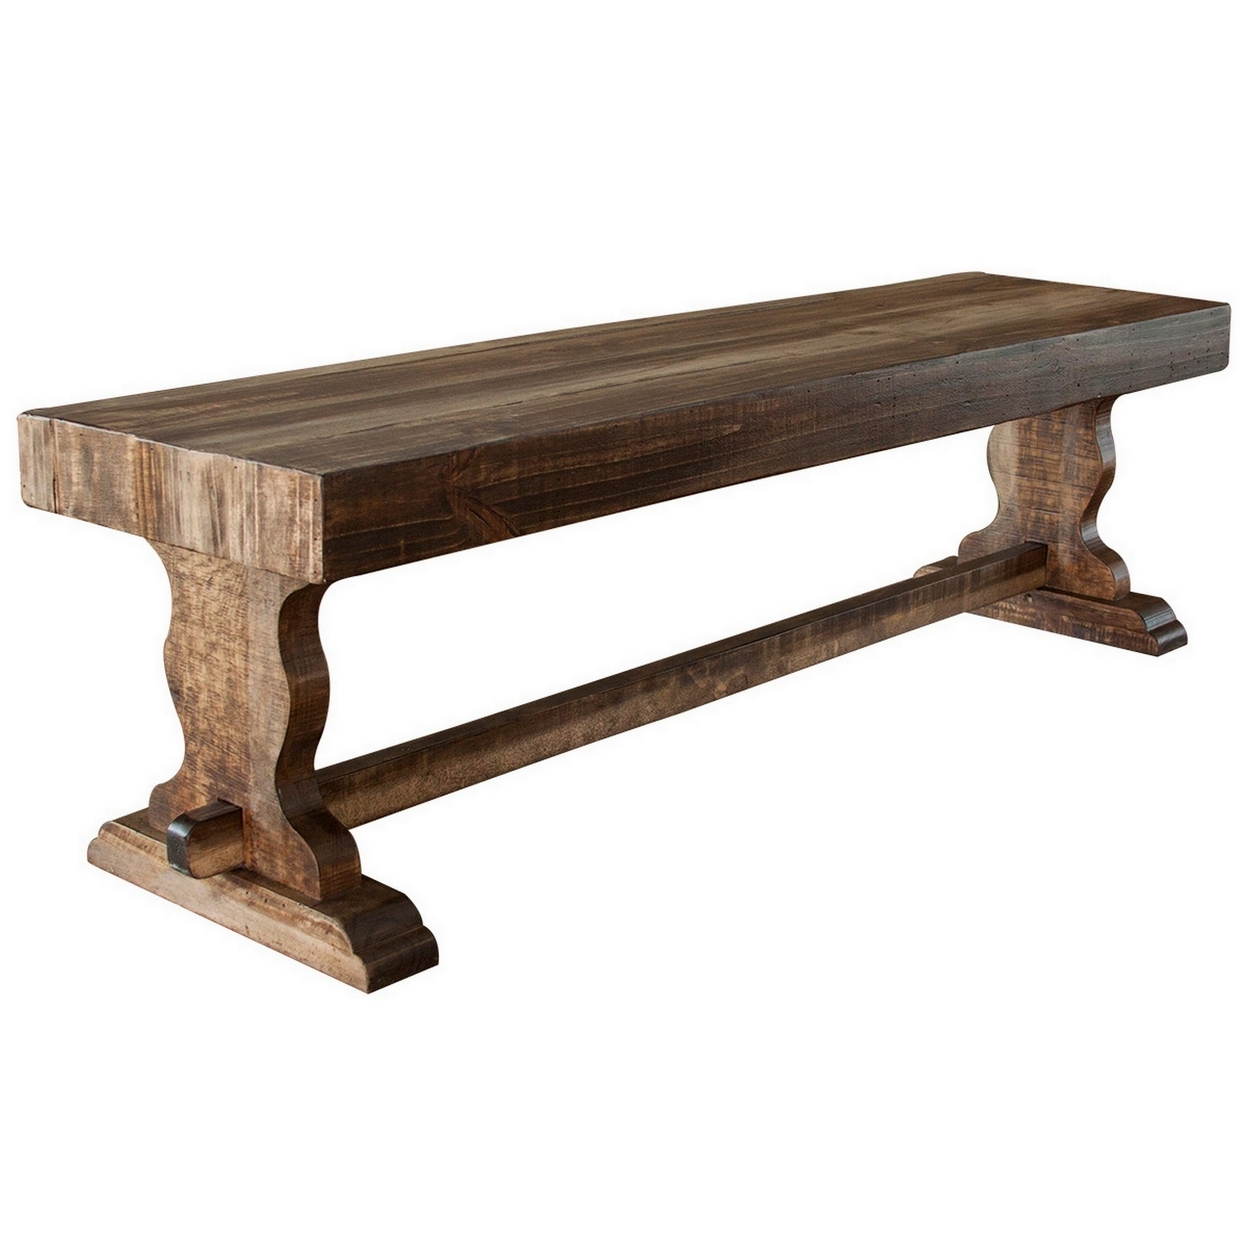 Ebb 70 Inch Wood Bench With Lacquered Finish, Solid Pine Wood, Light Brown- Saltoro Sherpi